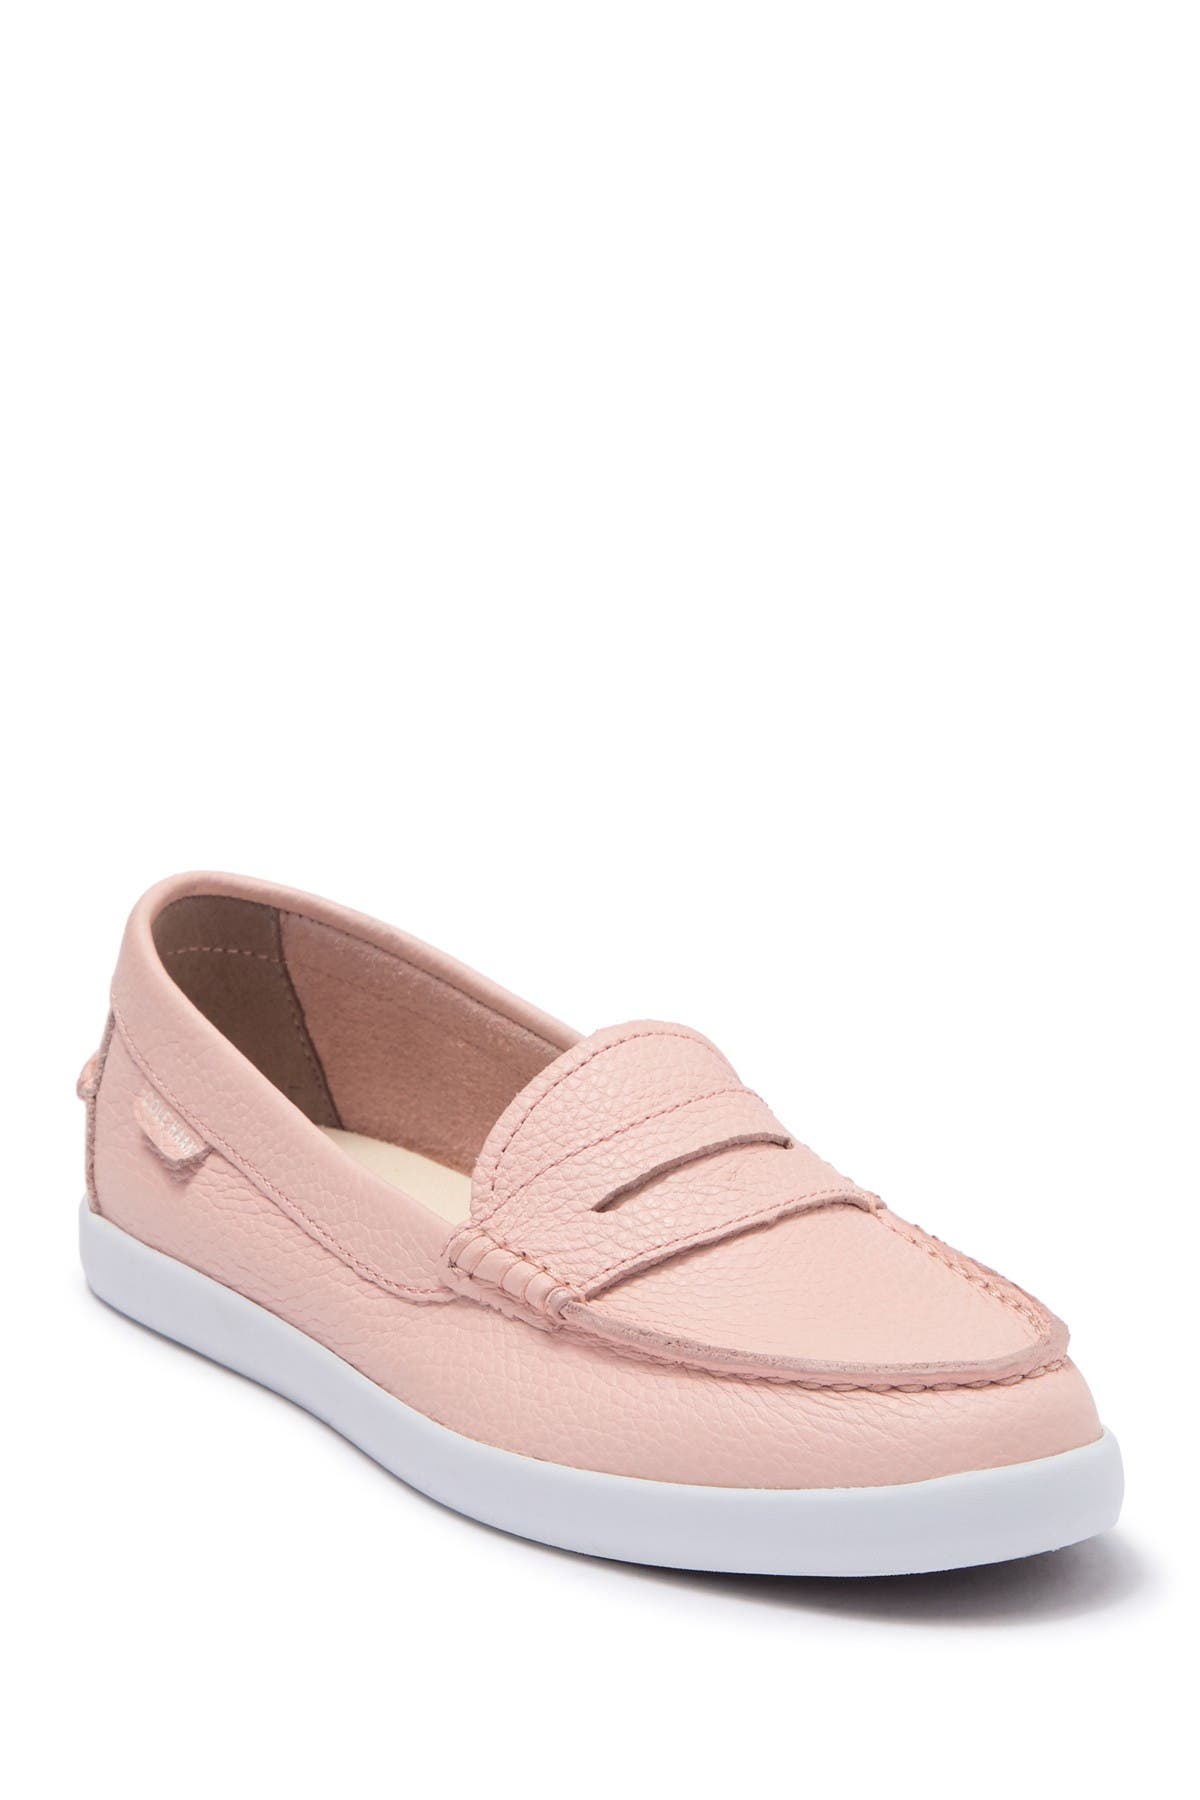 Cole Haan | Pinch Weekend Penny Loafer 